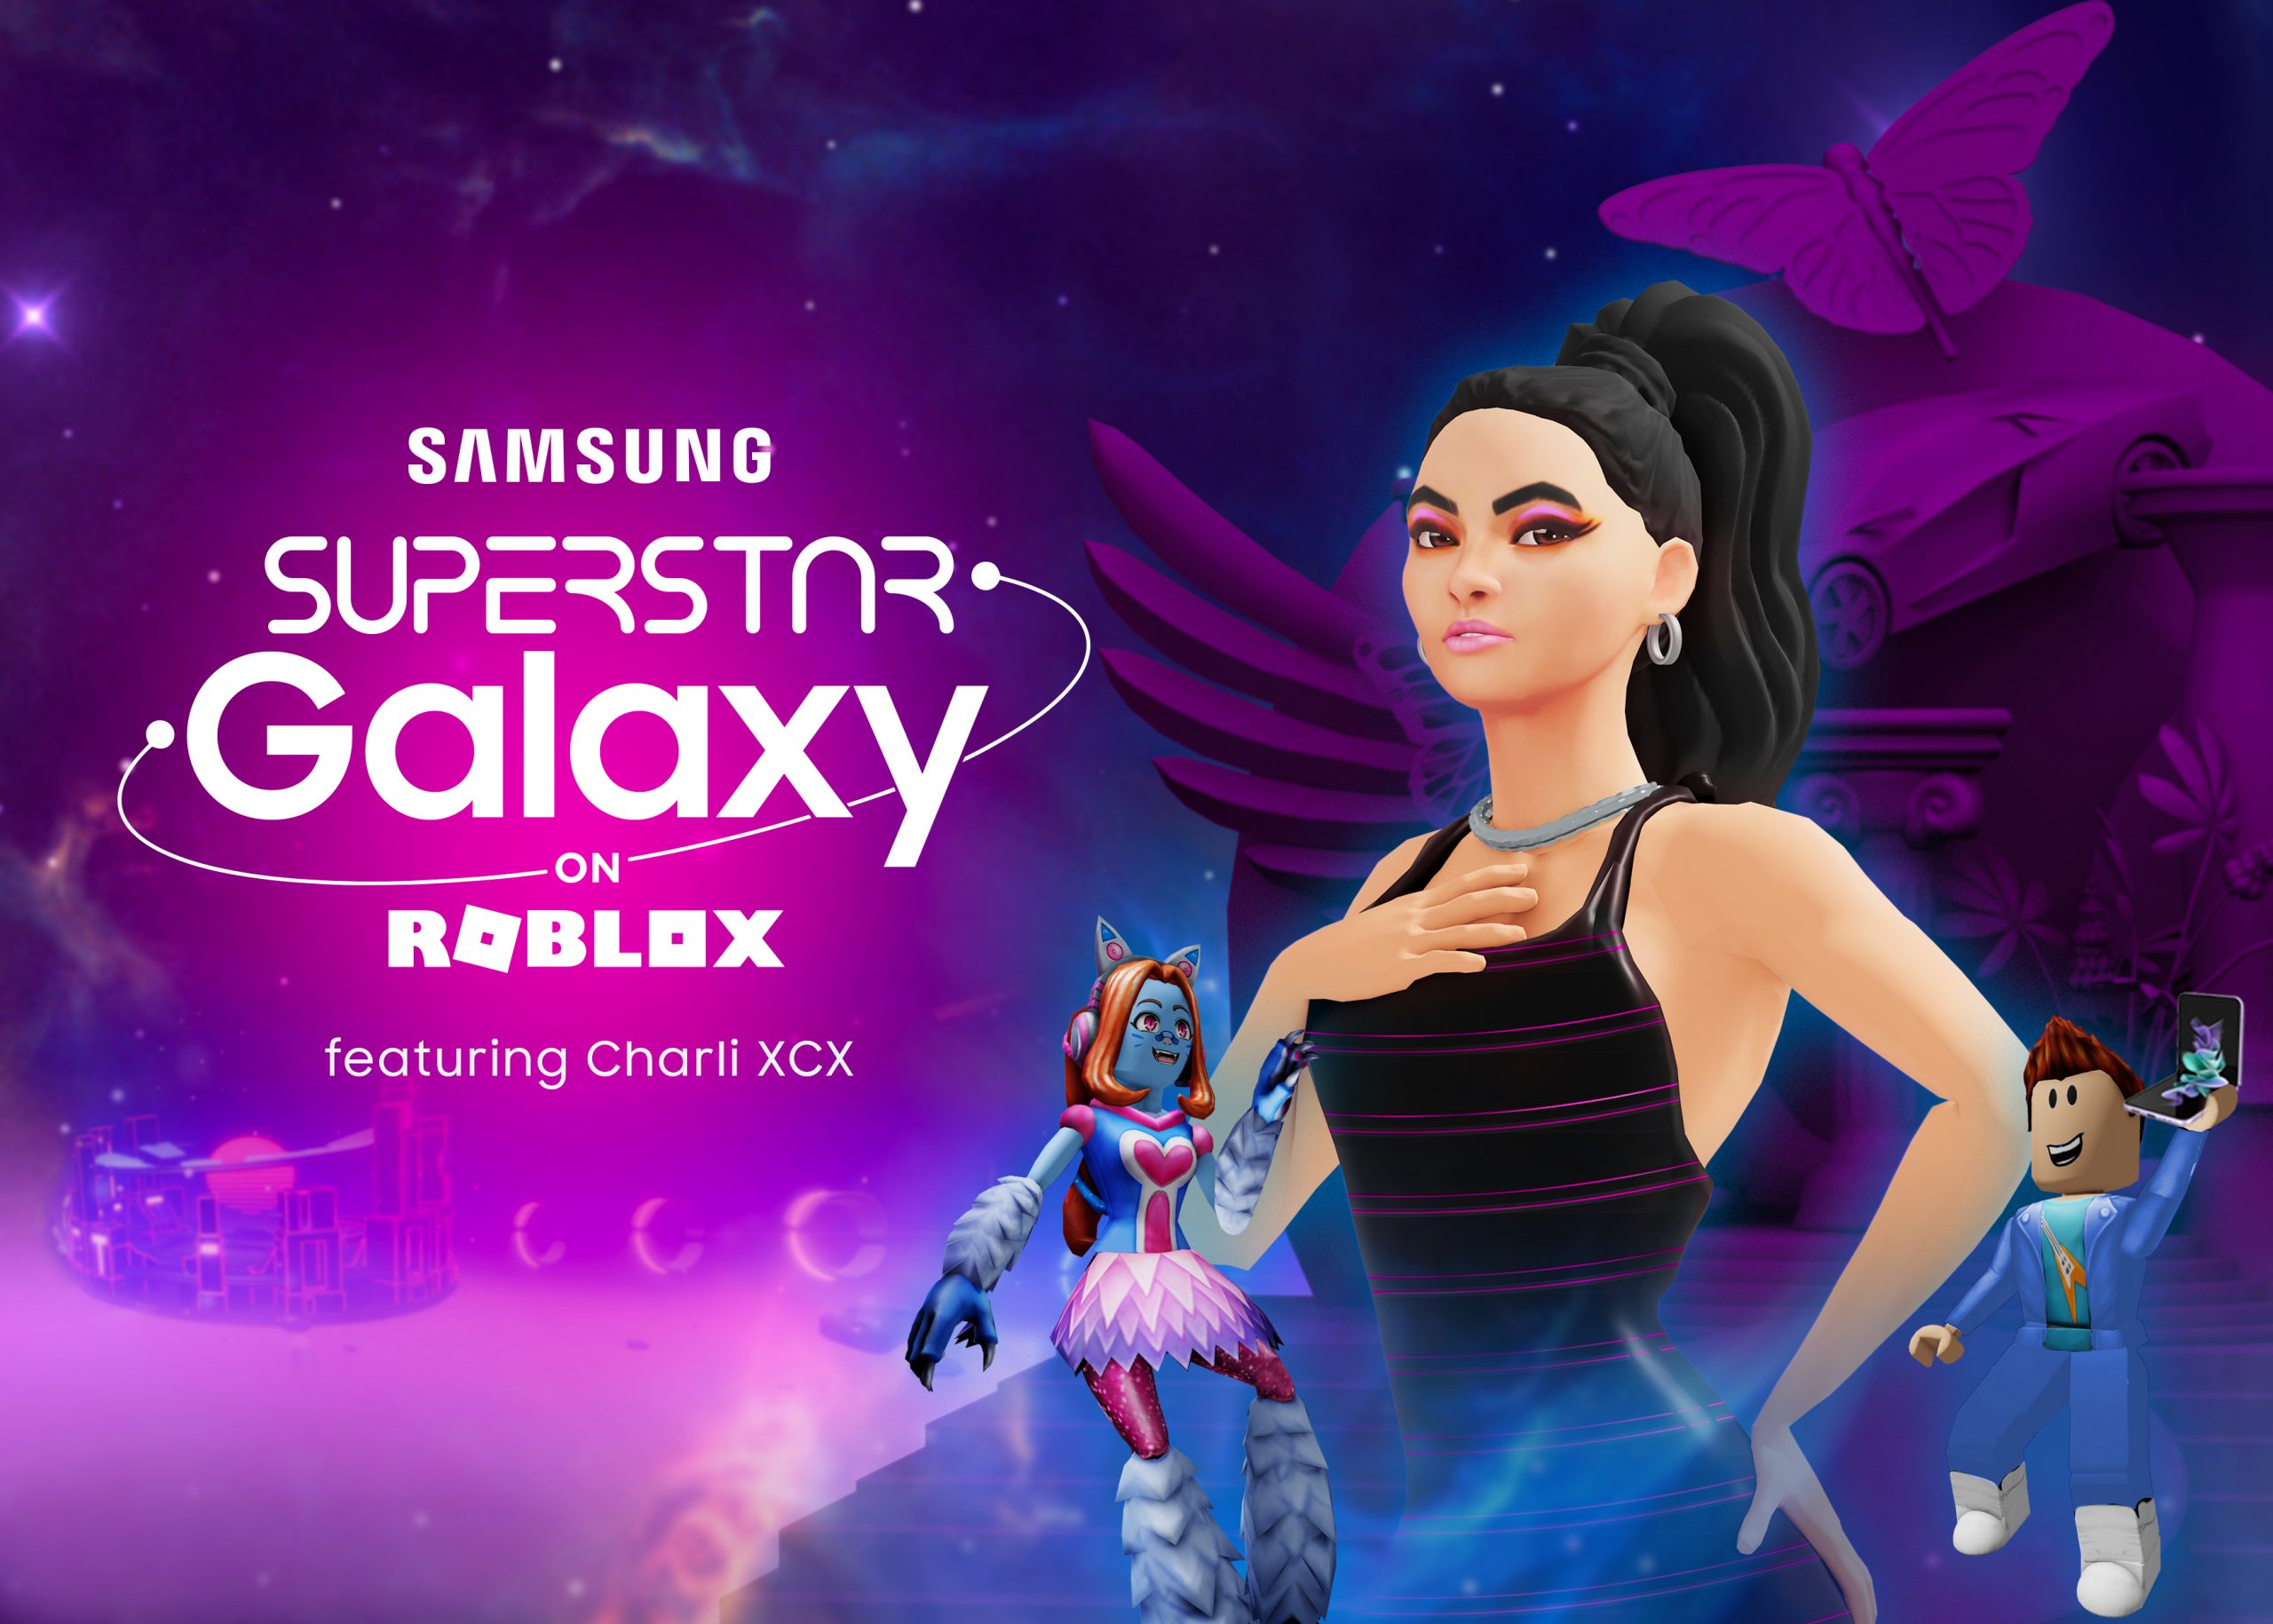 Samsung Superstar Galaxy on Roblox along with Pop Icon Charli XCX is now available for a limited time – Samsung UK Newsroom